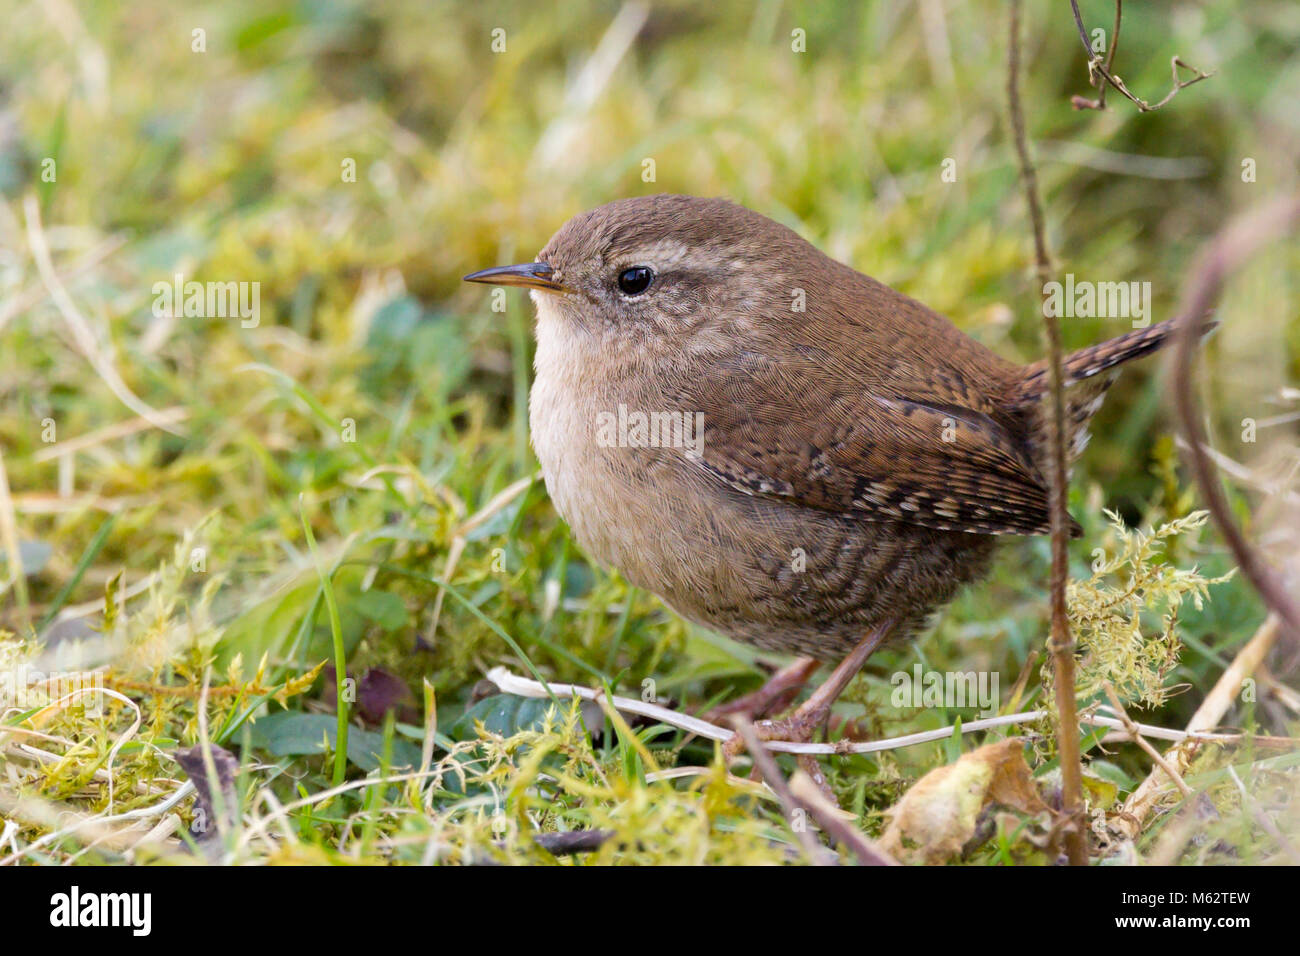 Wren (Troglodytes troglodytes) darting out from hedge at a swan enclosure at the Arundel wwt (wetland centre). Winter in Febuary 2018 small brown bird Stock Photo